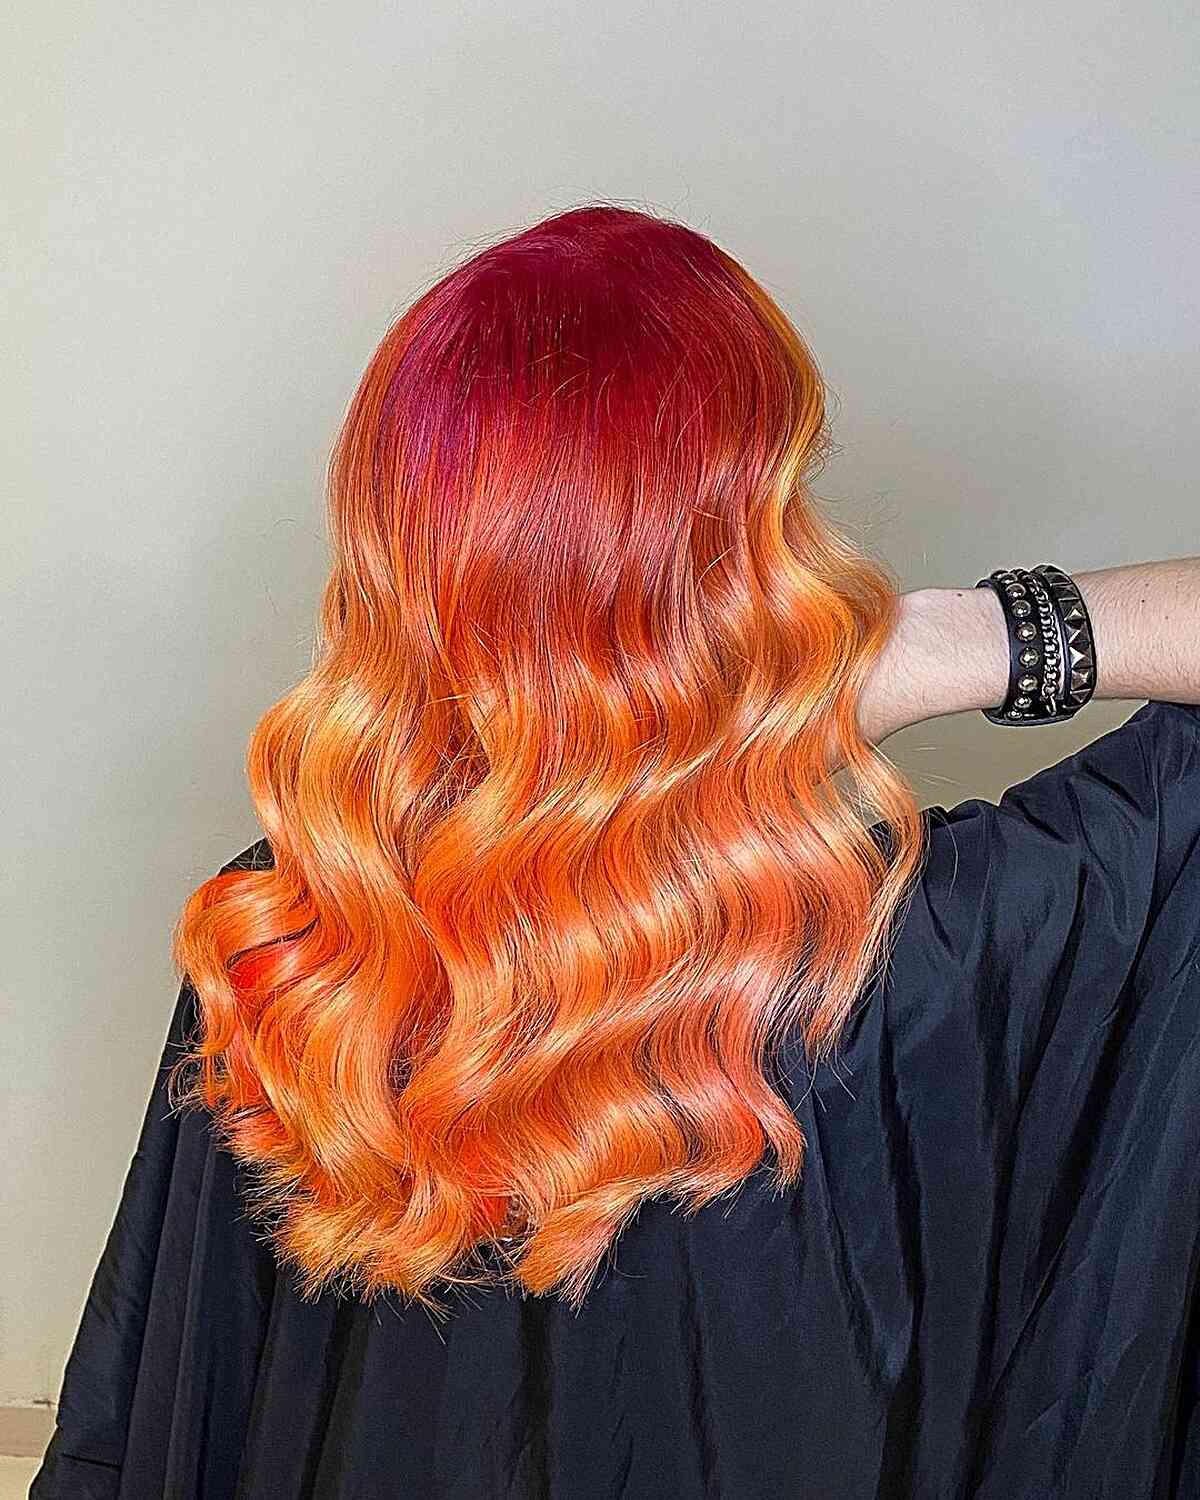 39 Top Ombre Hair Color Ideas Trending for 2018